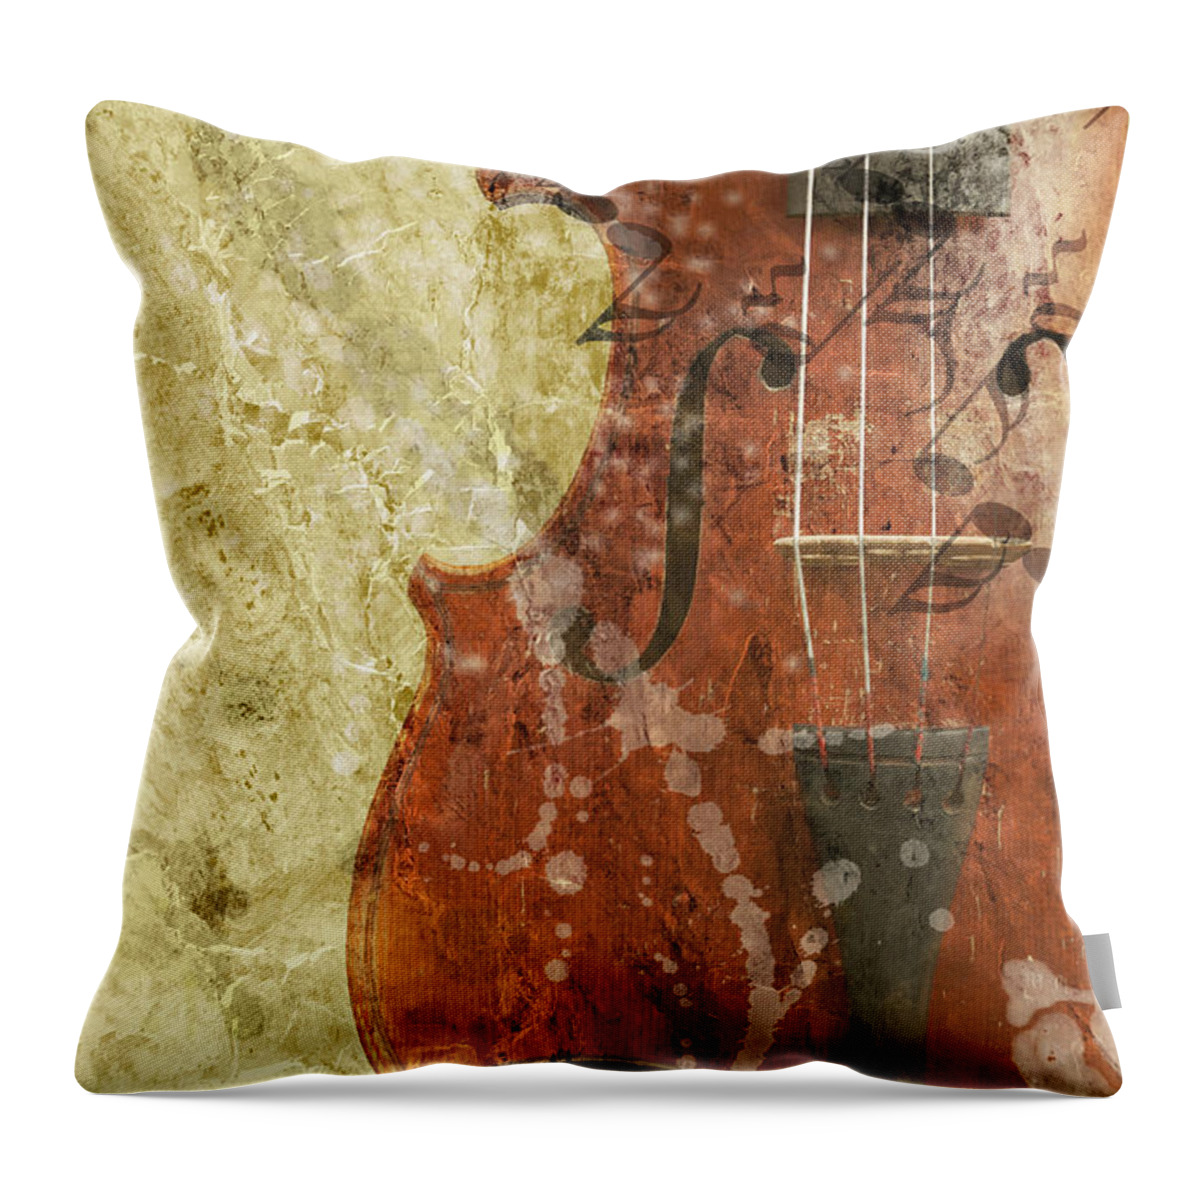 Concepts Throw Pillow featuring the digital art Fiddle In Grunge Style by Michal Boubin